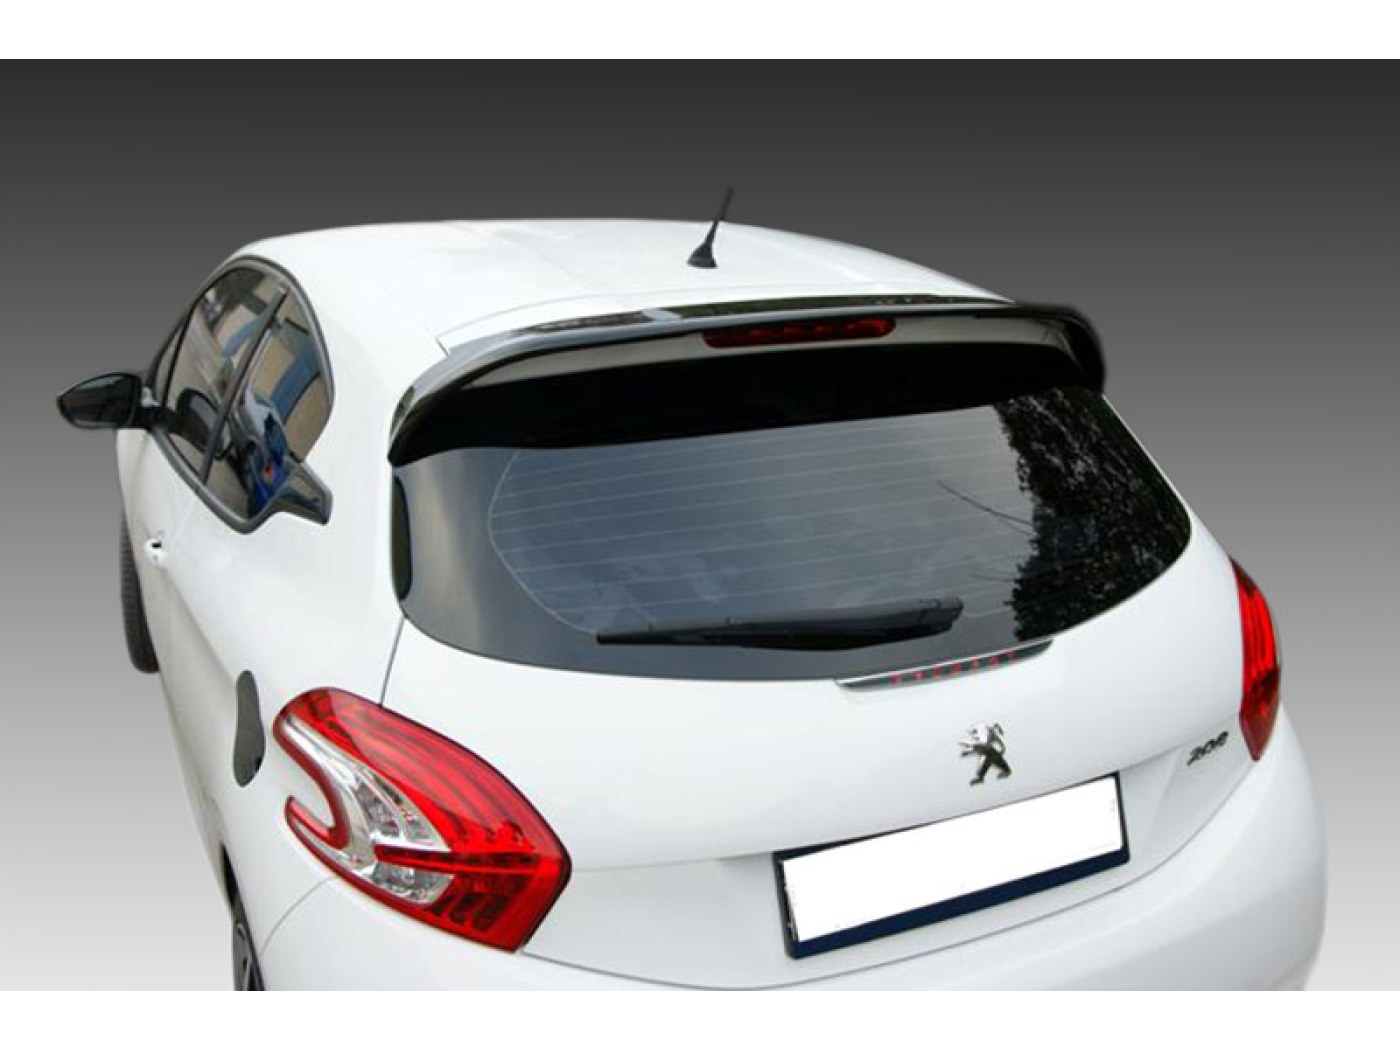 SPOILER REAR ROOF TAILGATE PEUGEOT 208 WING ACCESSORIES